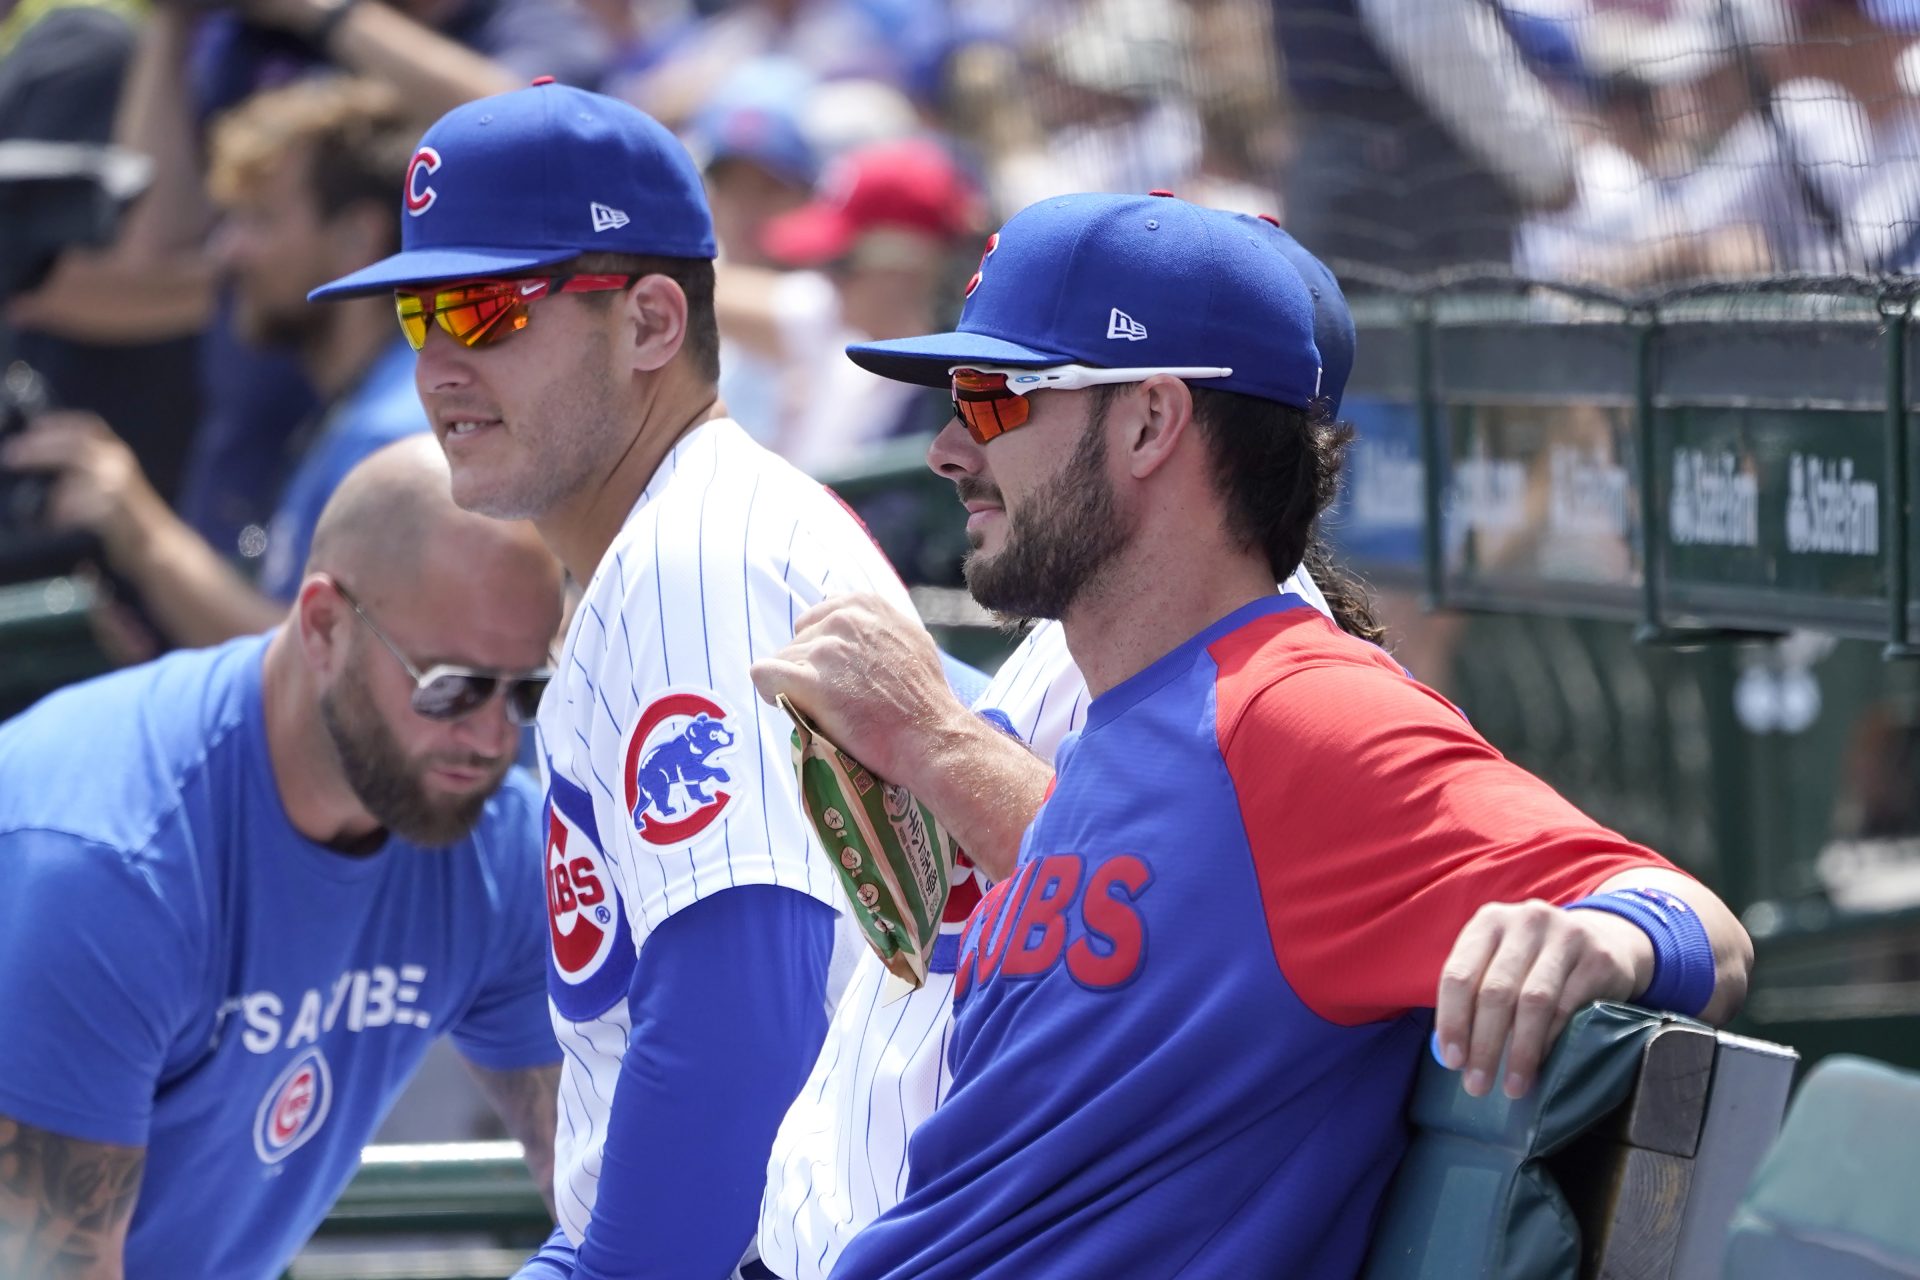 Cubs’ Updated Lineup, Payroll After Kris Bryant, Anthony Rizzo, Javier Baez Trades